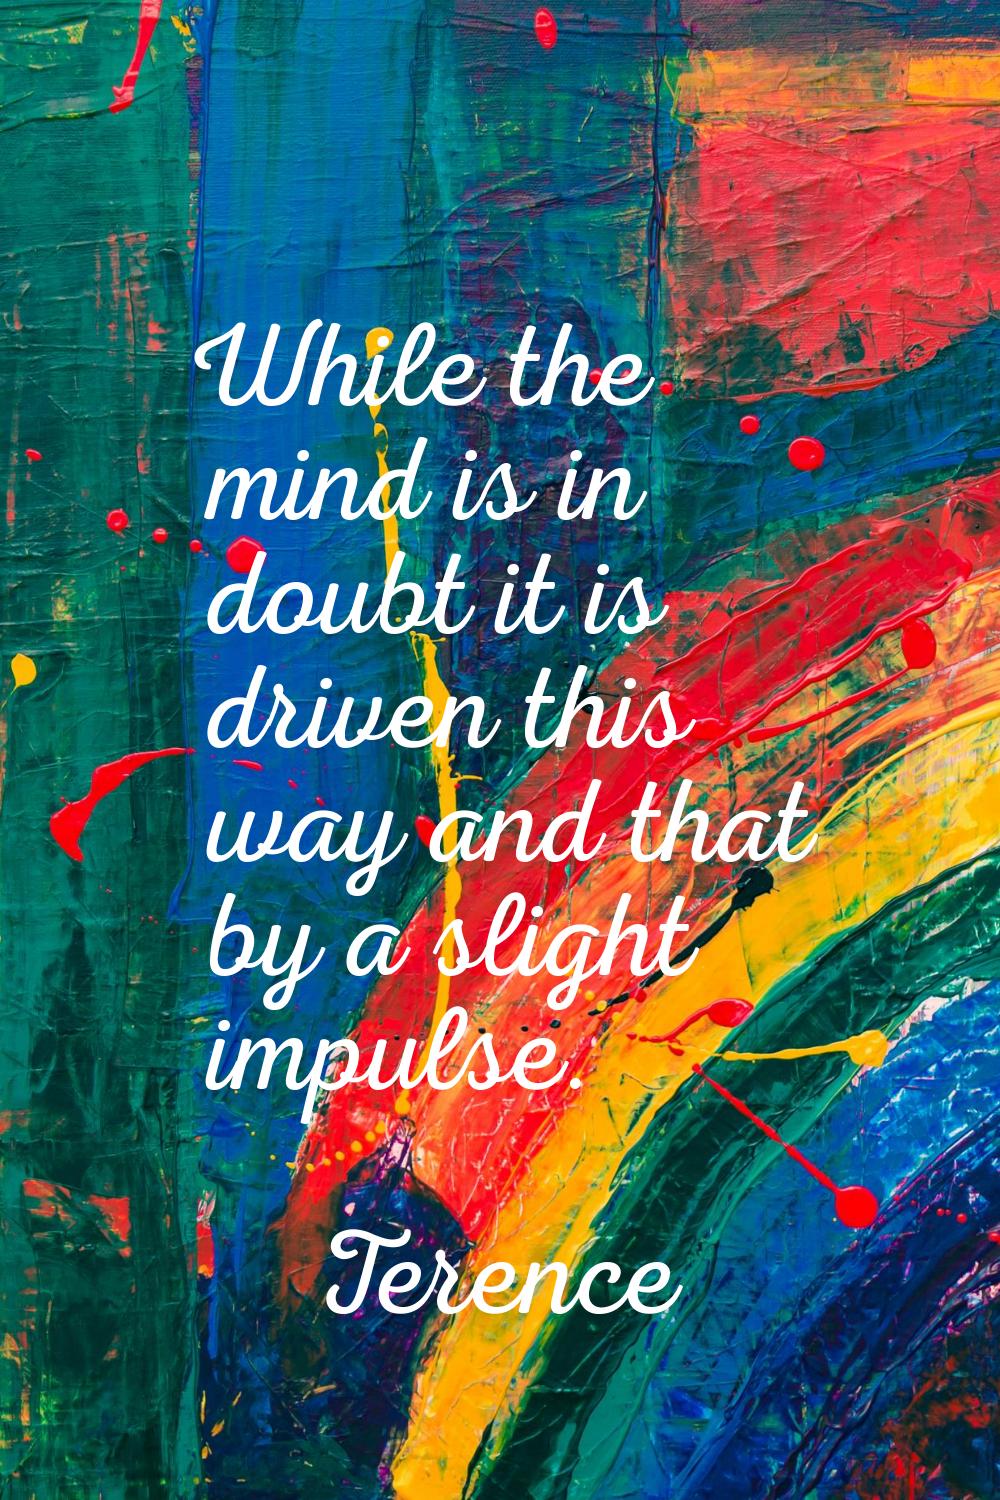 While the mind is in doubt it is driven this way and that by a slight impulse.